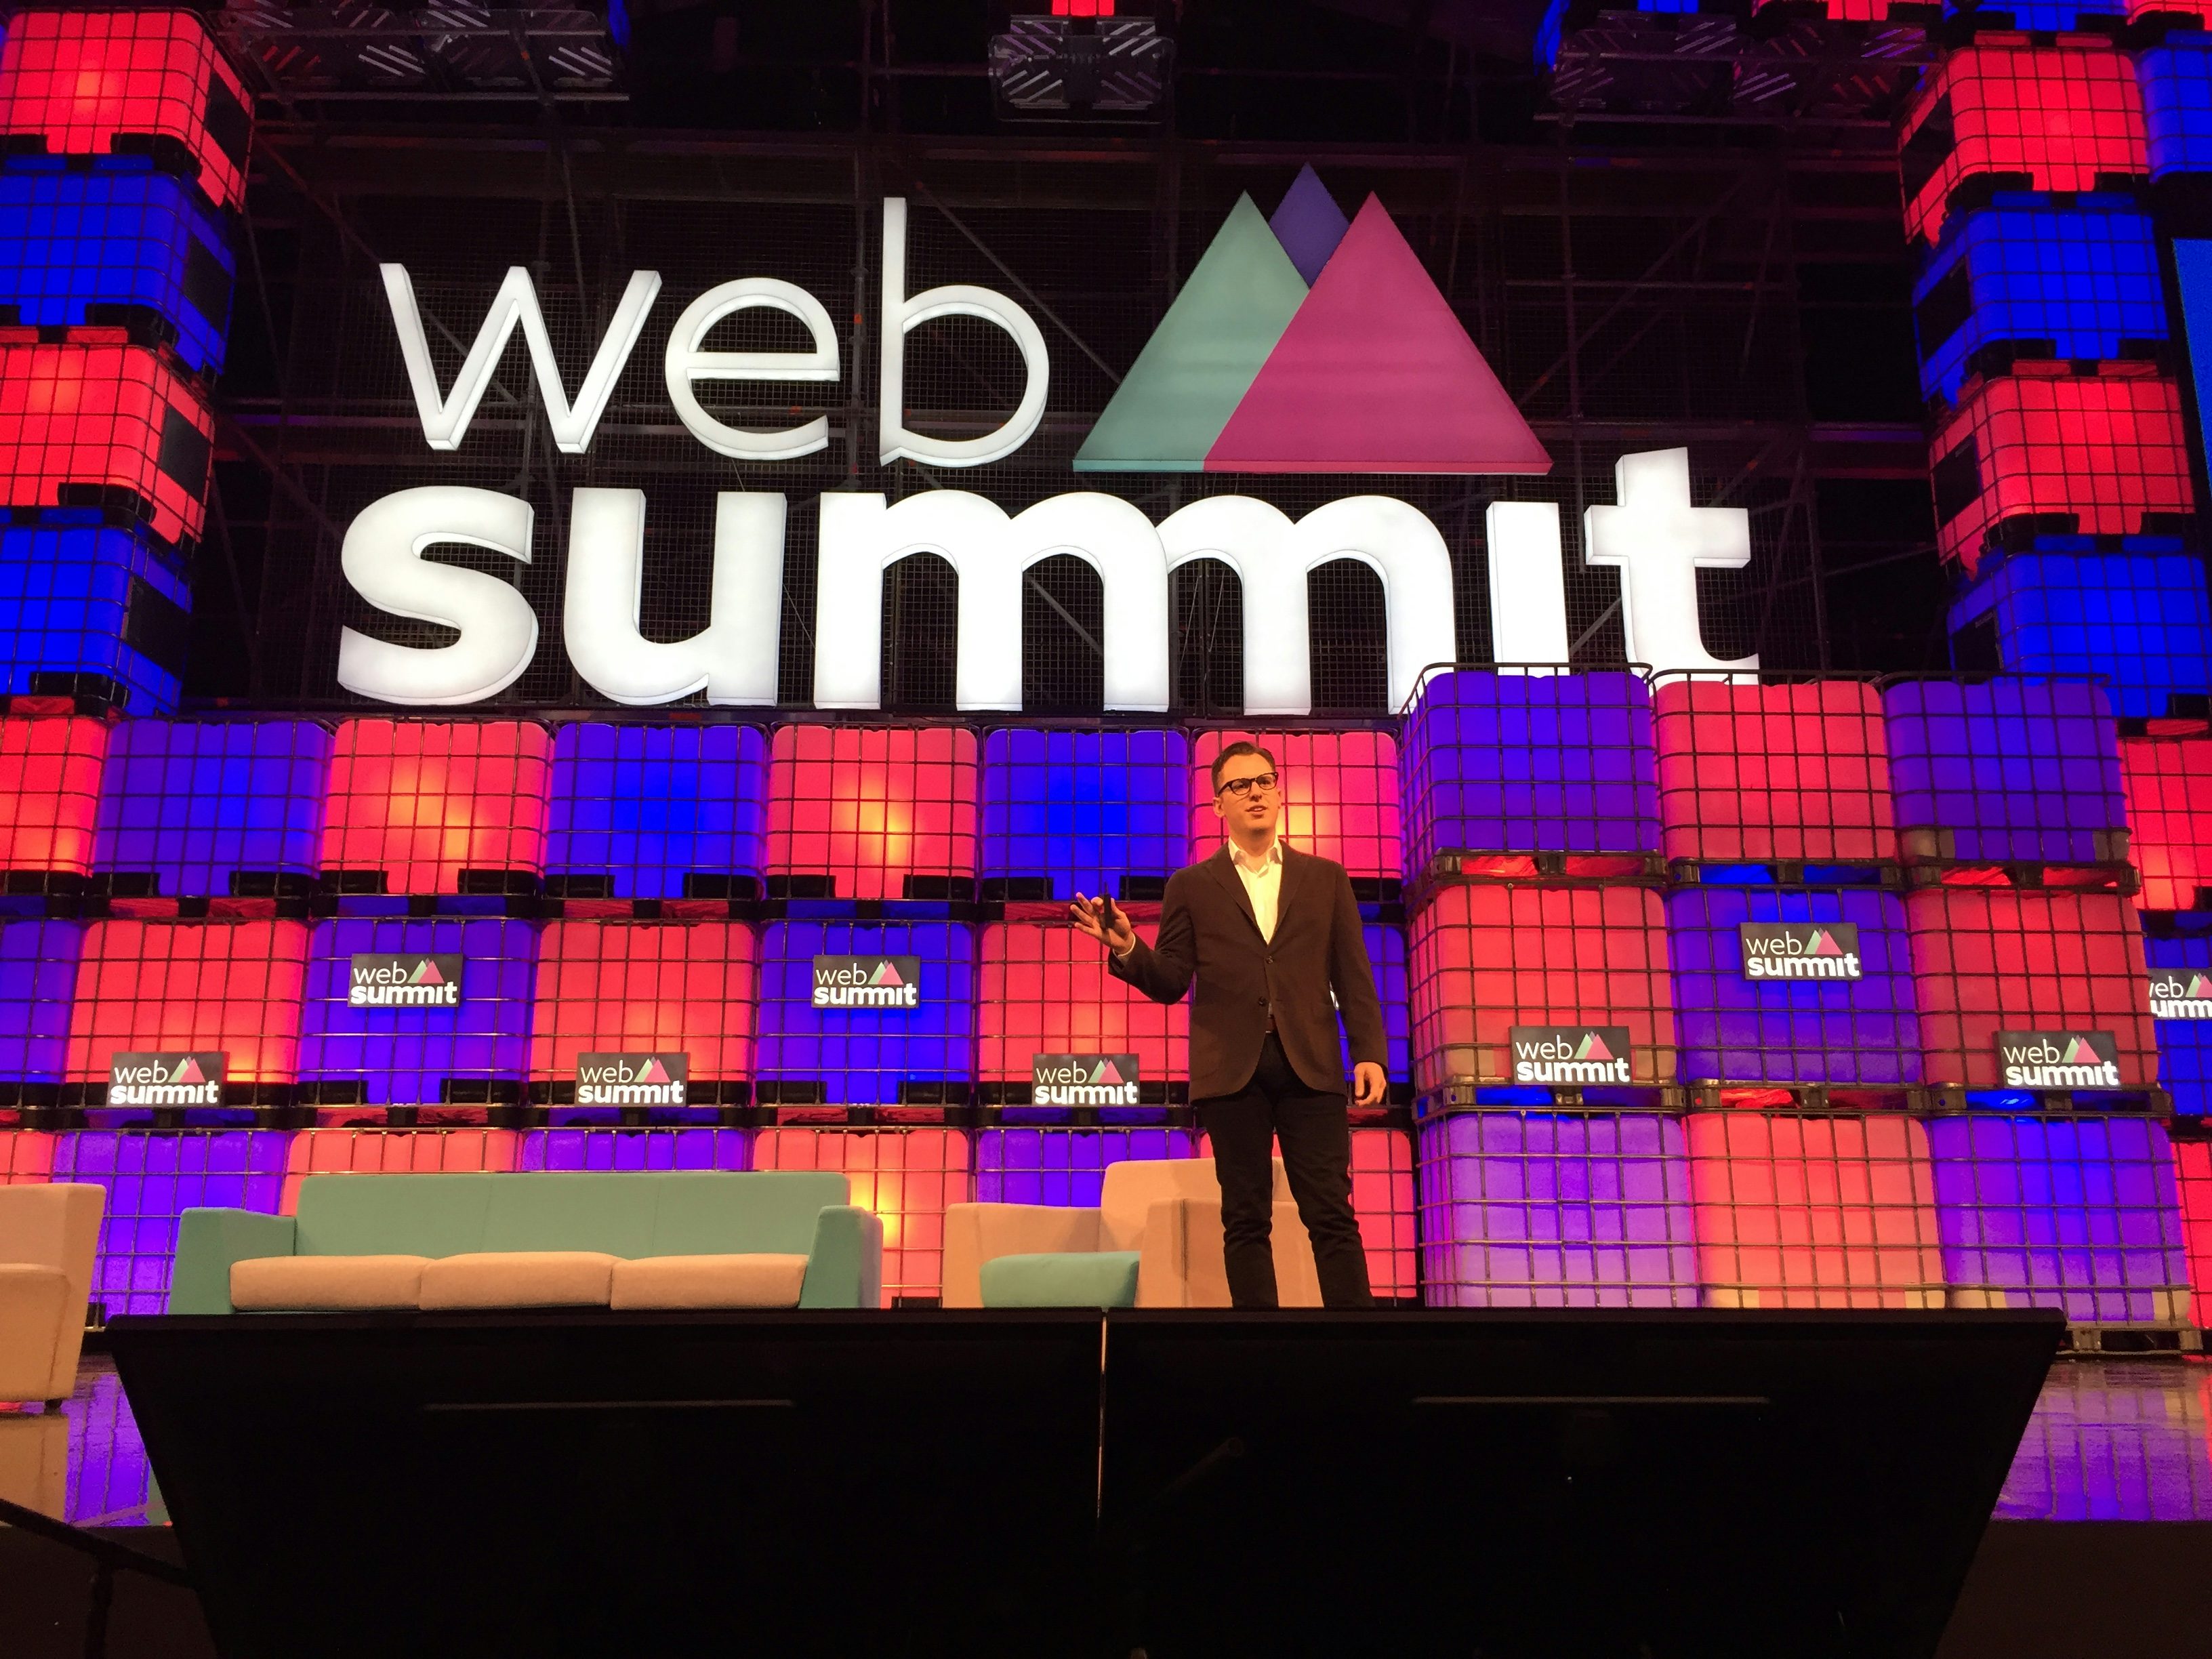 Instagram co-founder on stage at the Web Summit in Dublin